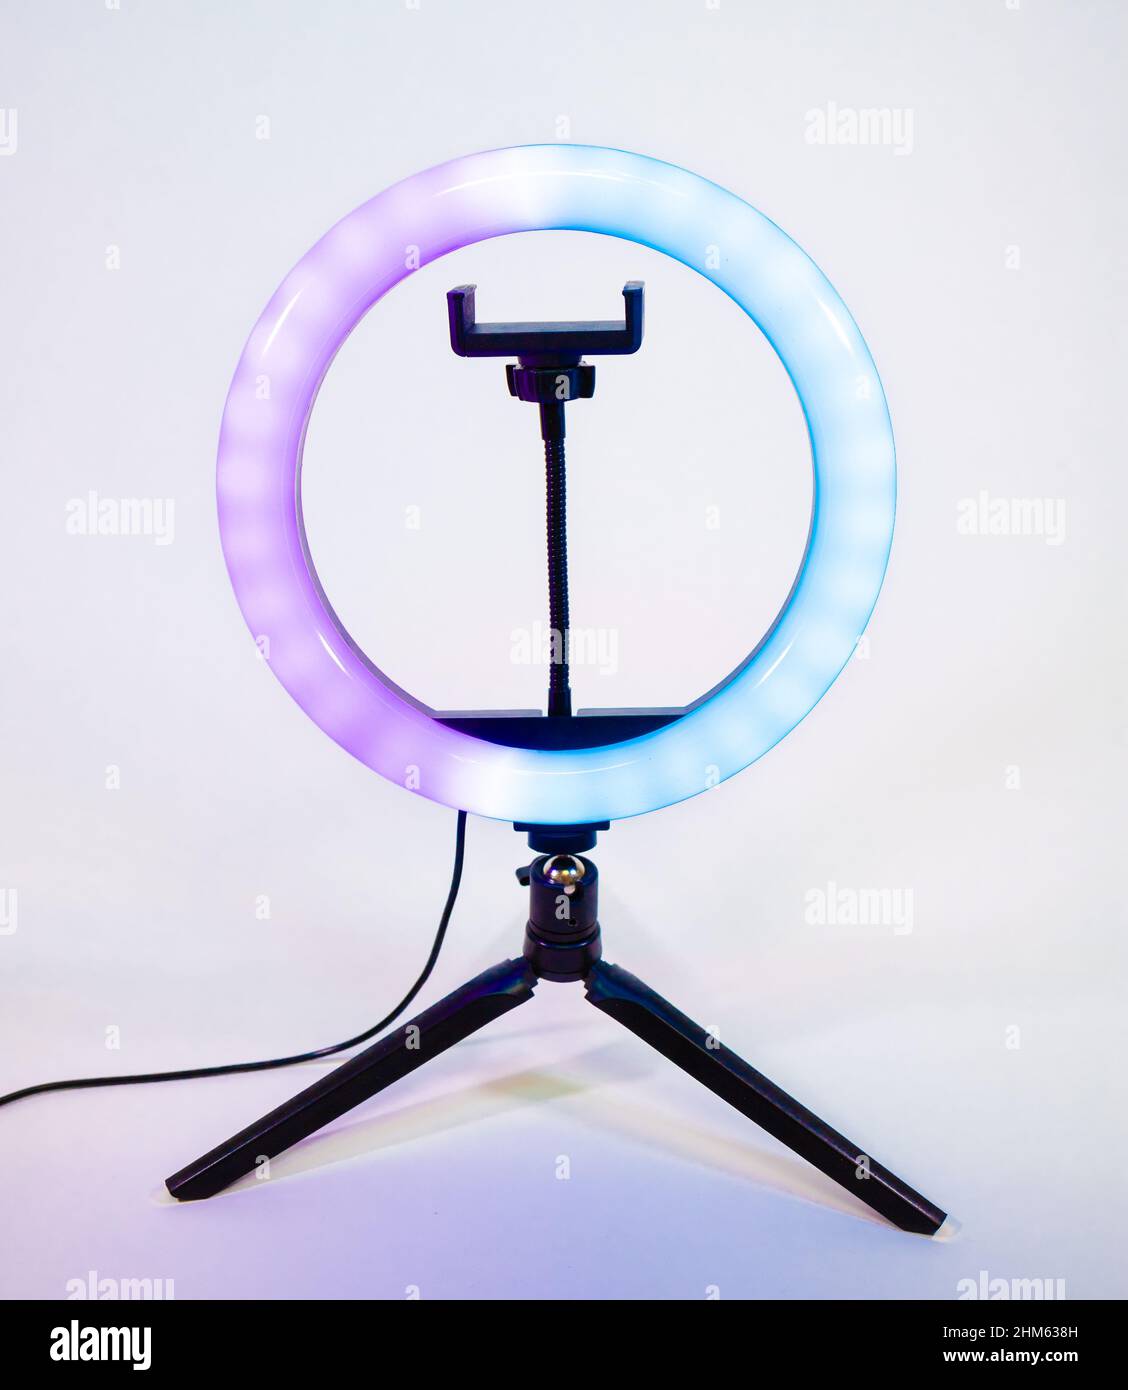 Ring lamp on a small tripod. Purple and blue light. Stock Photo